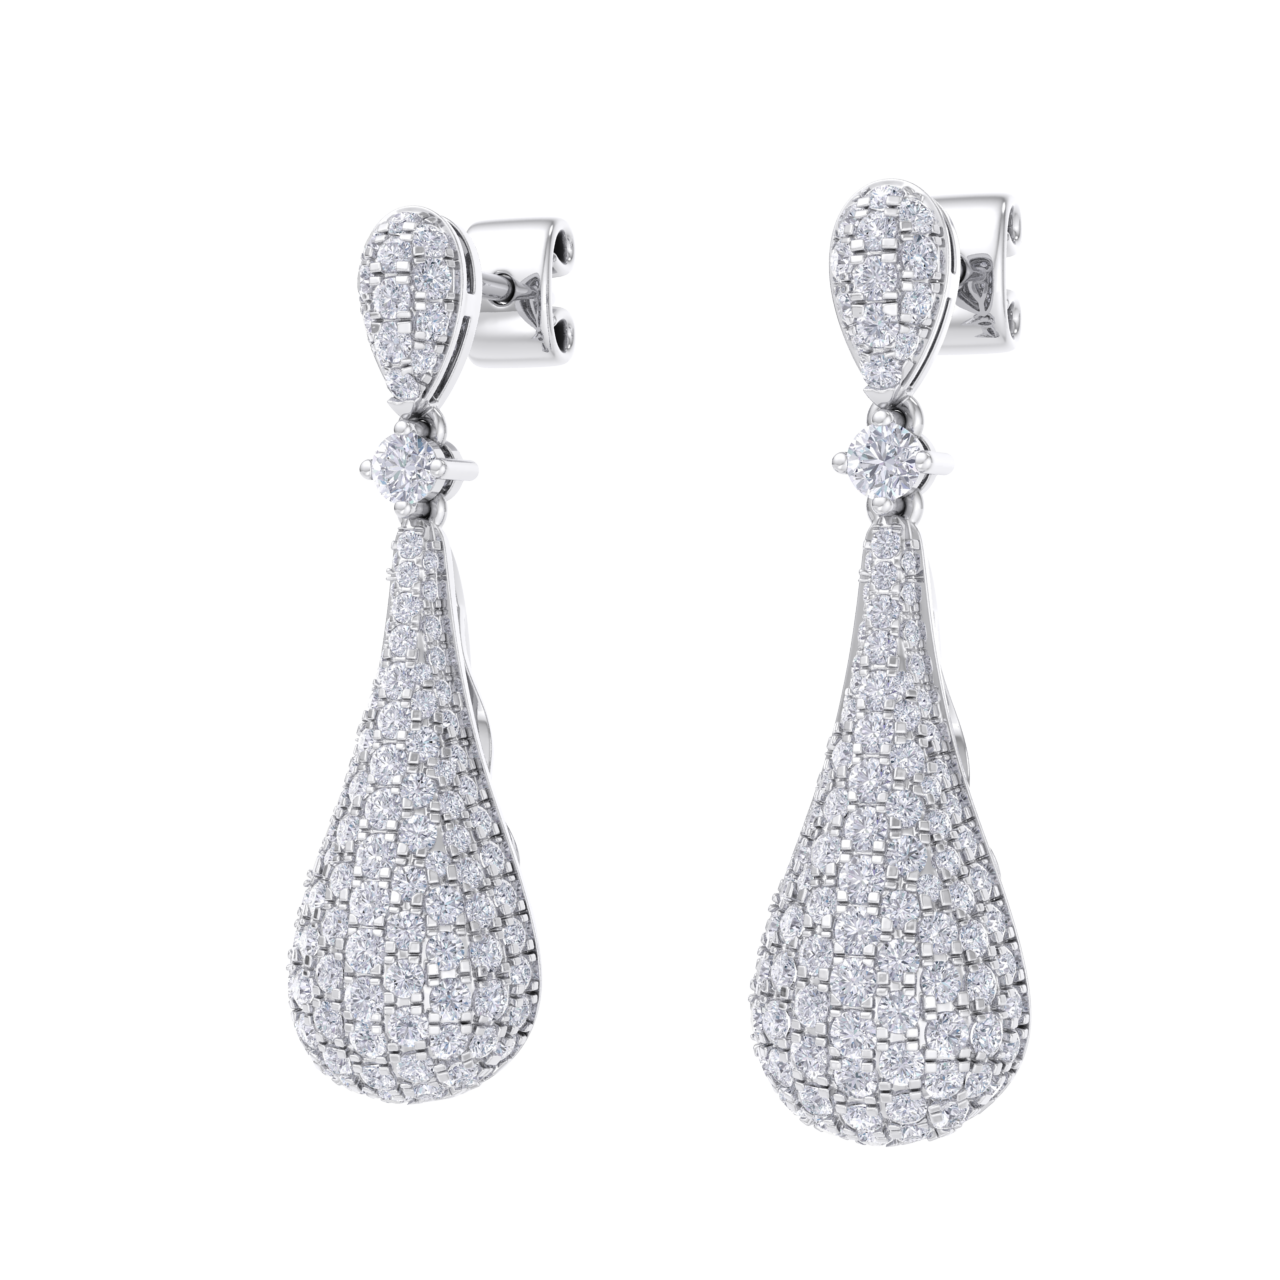 Diamond chandelier earrings in yellow gold with white diamonds of 1.73 ct in weight